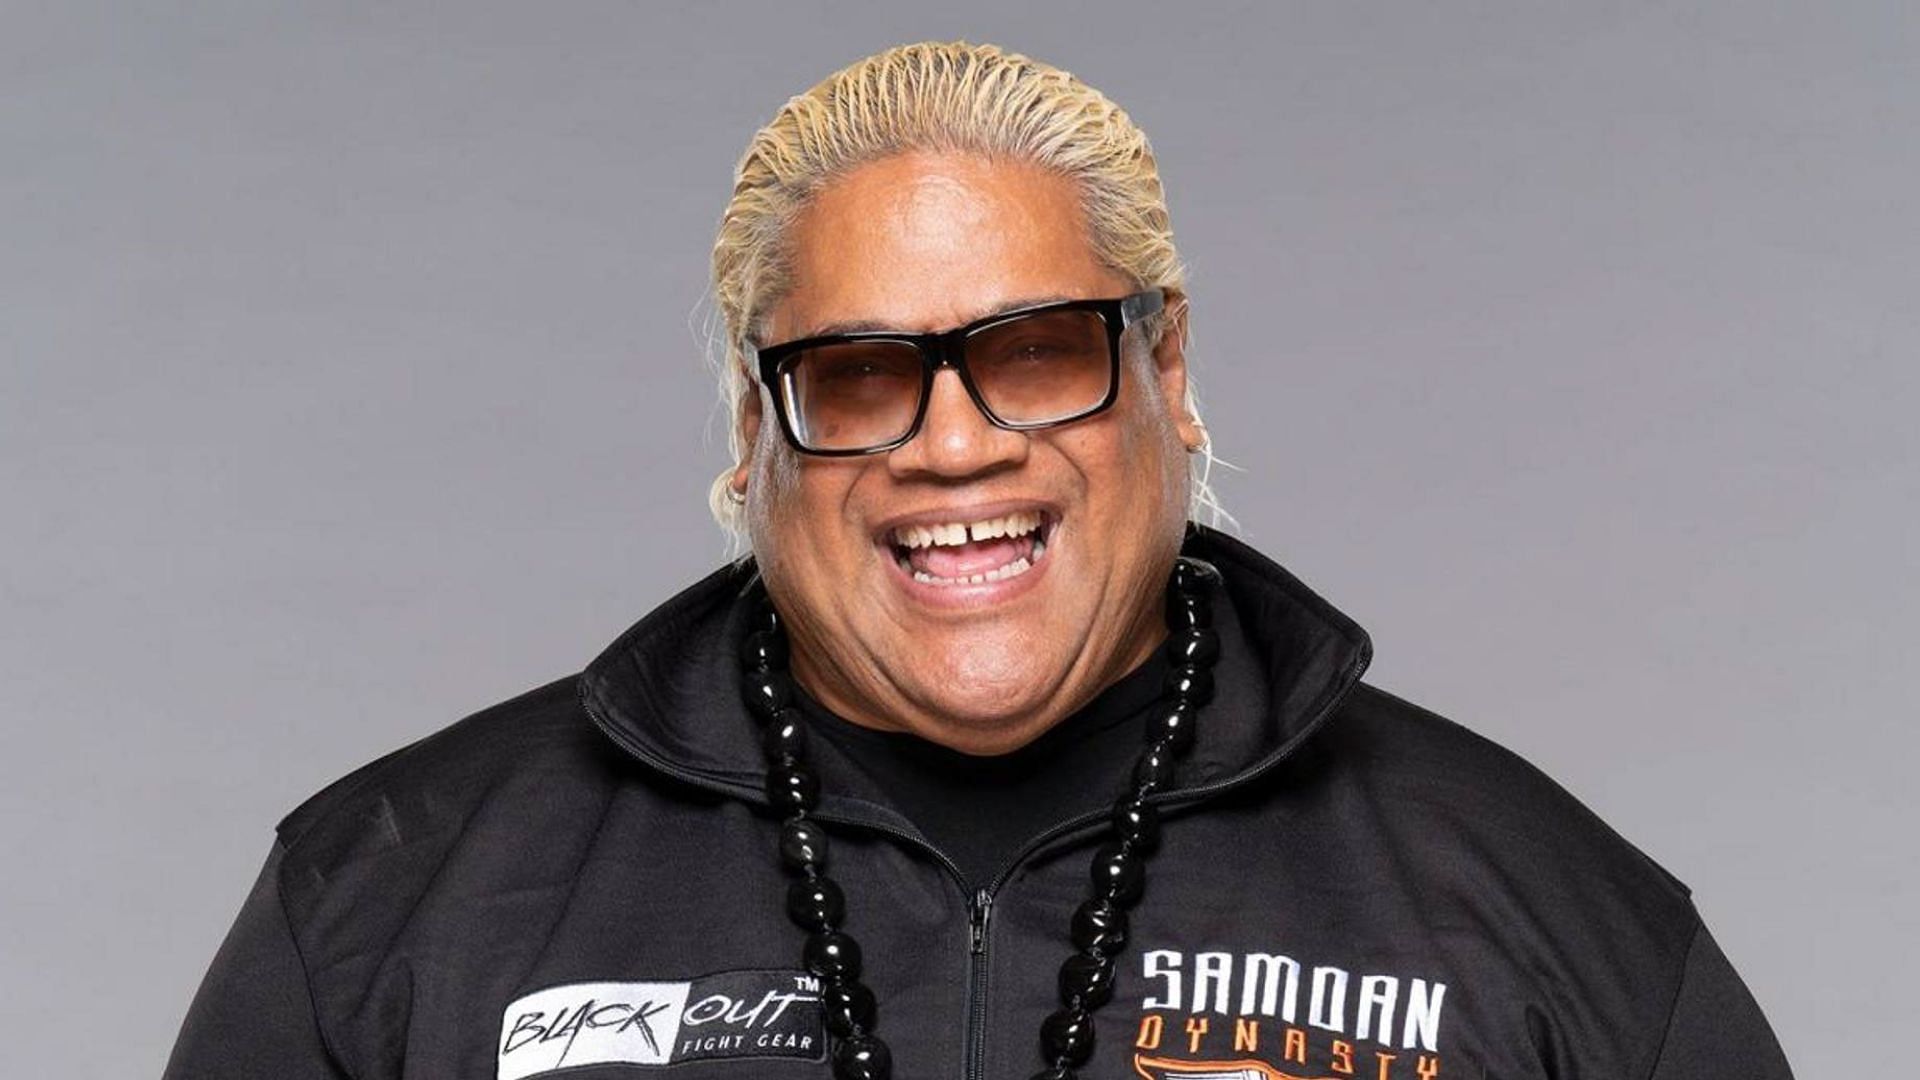 Rikishi was inducted into the WWE Hall of Fame in 2015